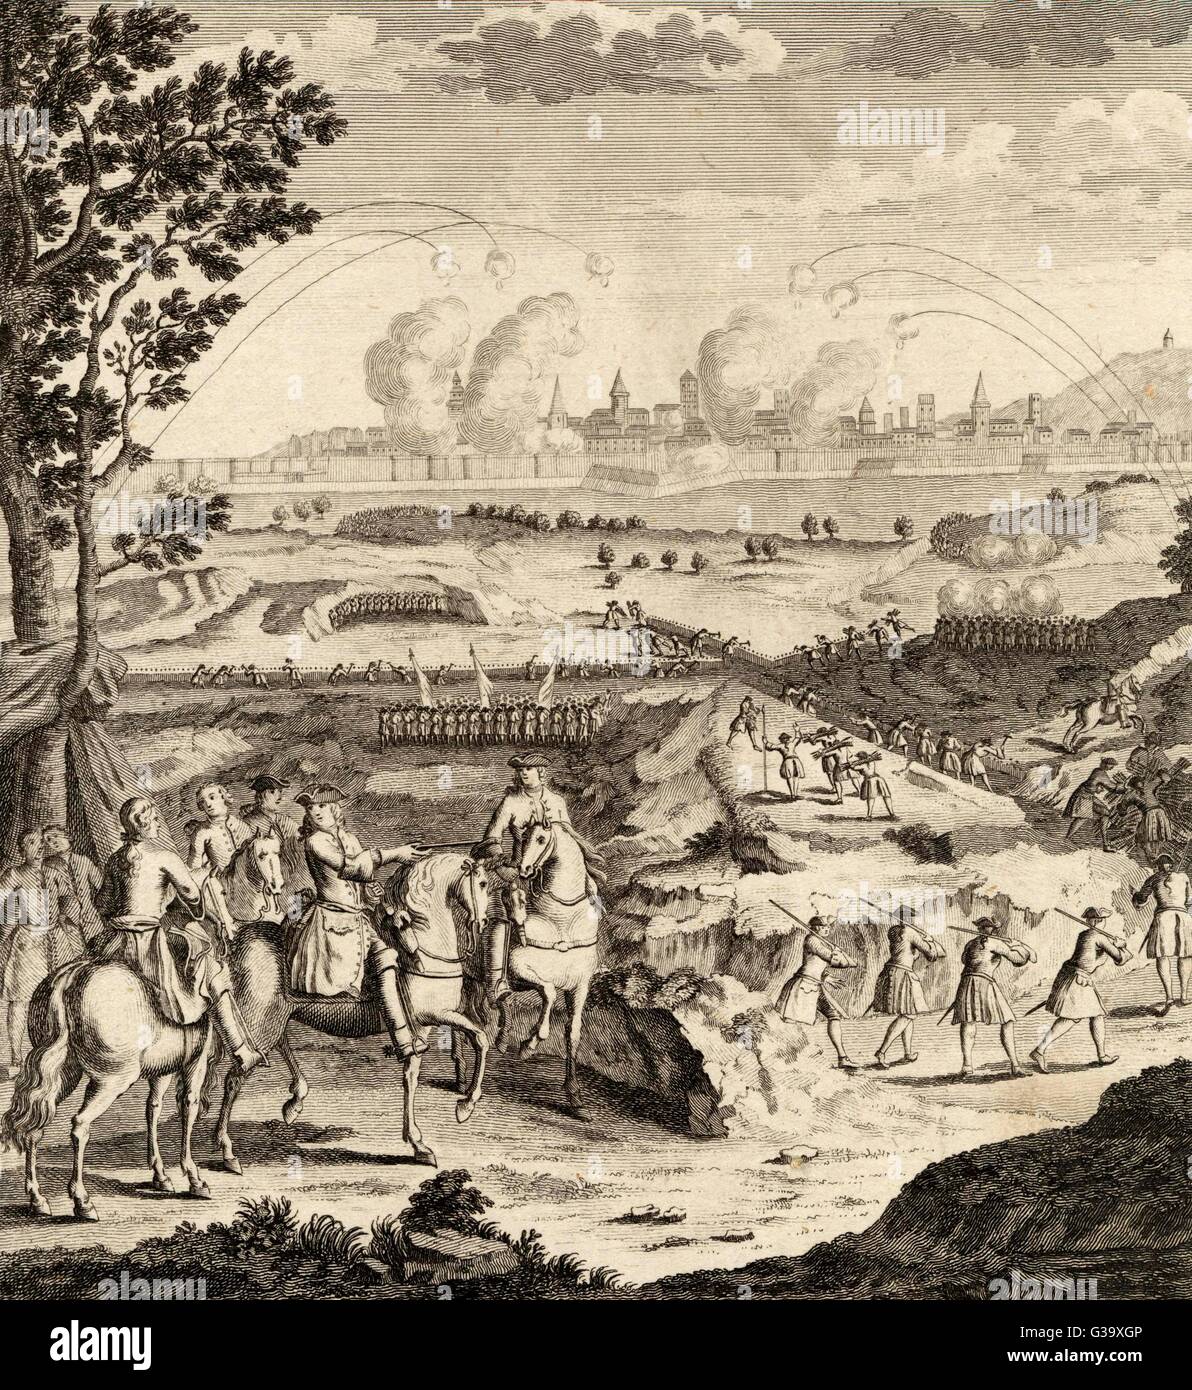 SIEGE OF BARCELONA The city is besieged for many  months before finally  capitulating to the earl of  Peterborough in 1706      Date: 1705 - 1706 Stock Photo